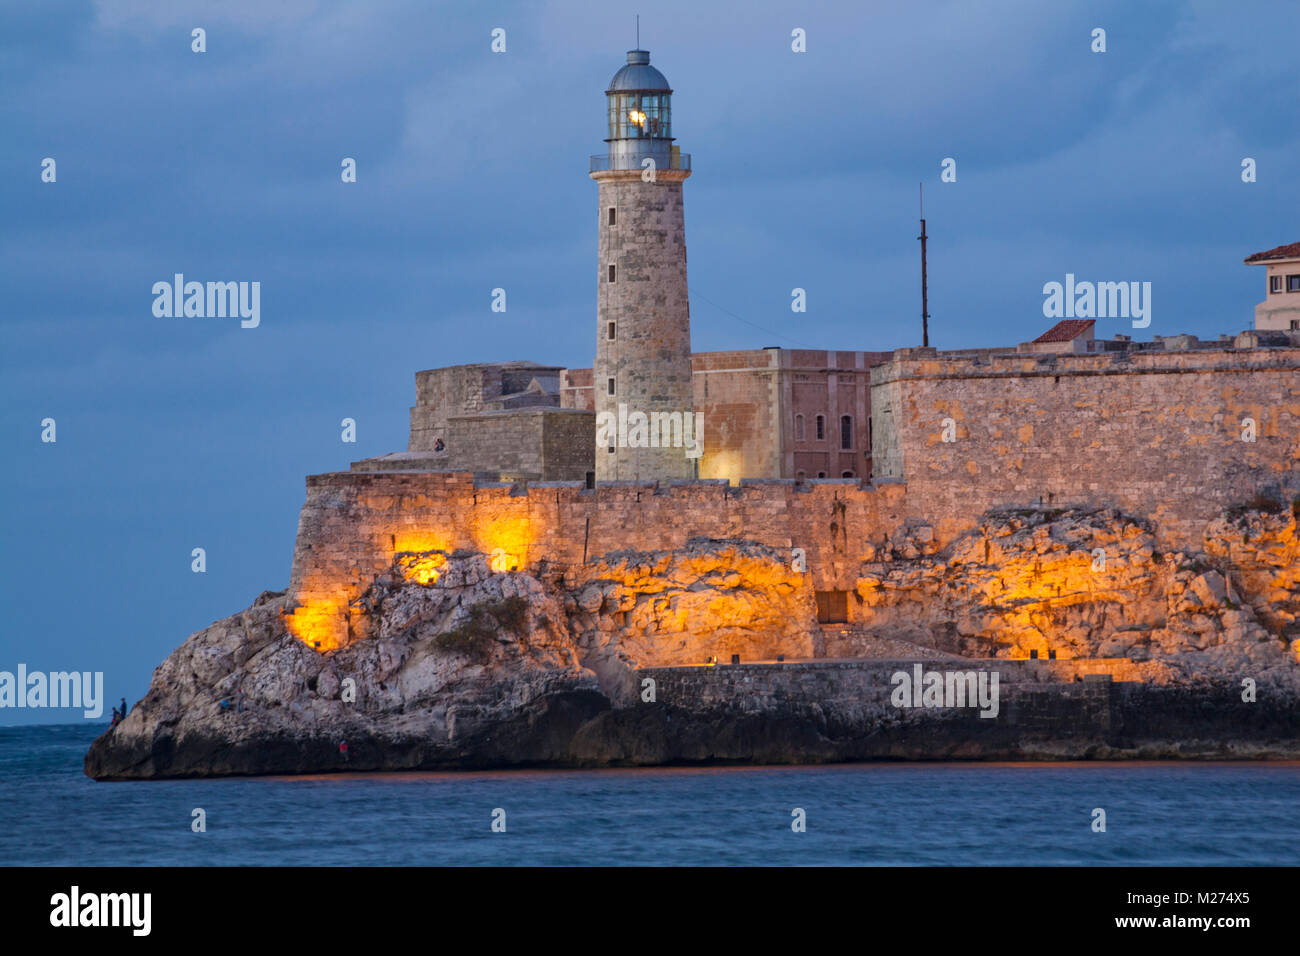 A view of Morro or El Morro Castle (fortress) outside the entrance to  Havana Bay in Cuba Stock Photo - Alamy